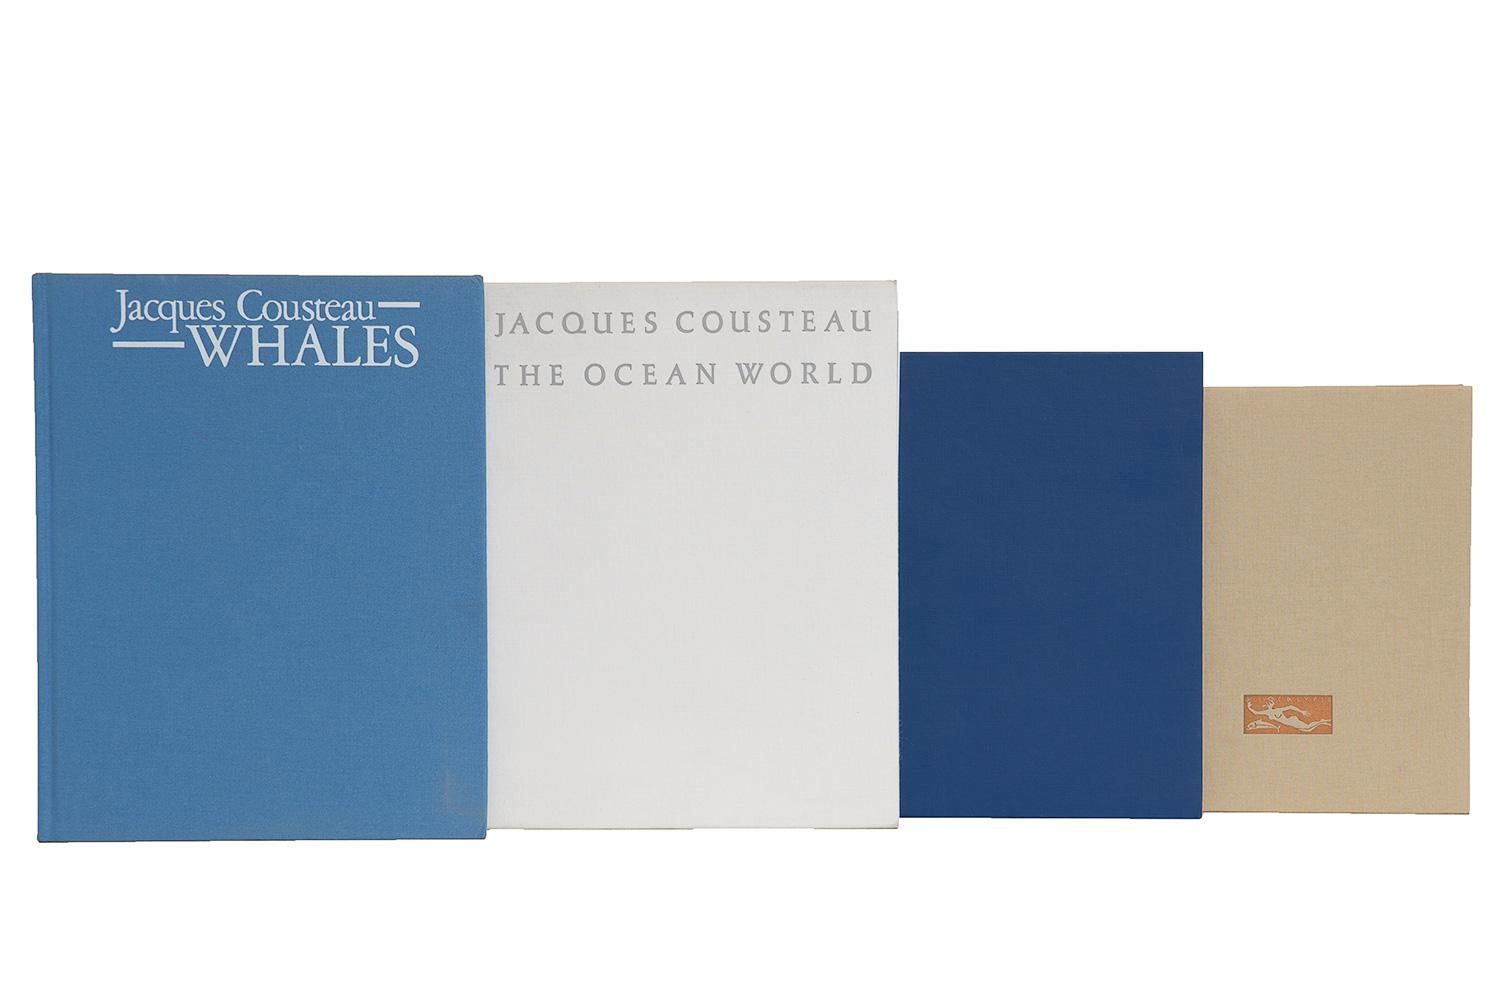 Features a blend of four authentic retro books published, 1963-1989. Includes a variety of nautical themed selections in blue, cream, and white. Featuring Jacques Cousteau and his ocean adventures. Decorative books in moderate overall wear suitable